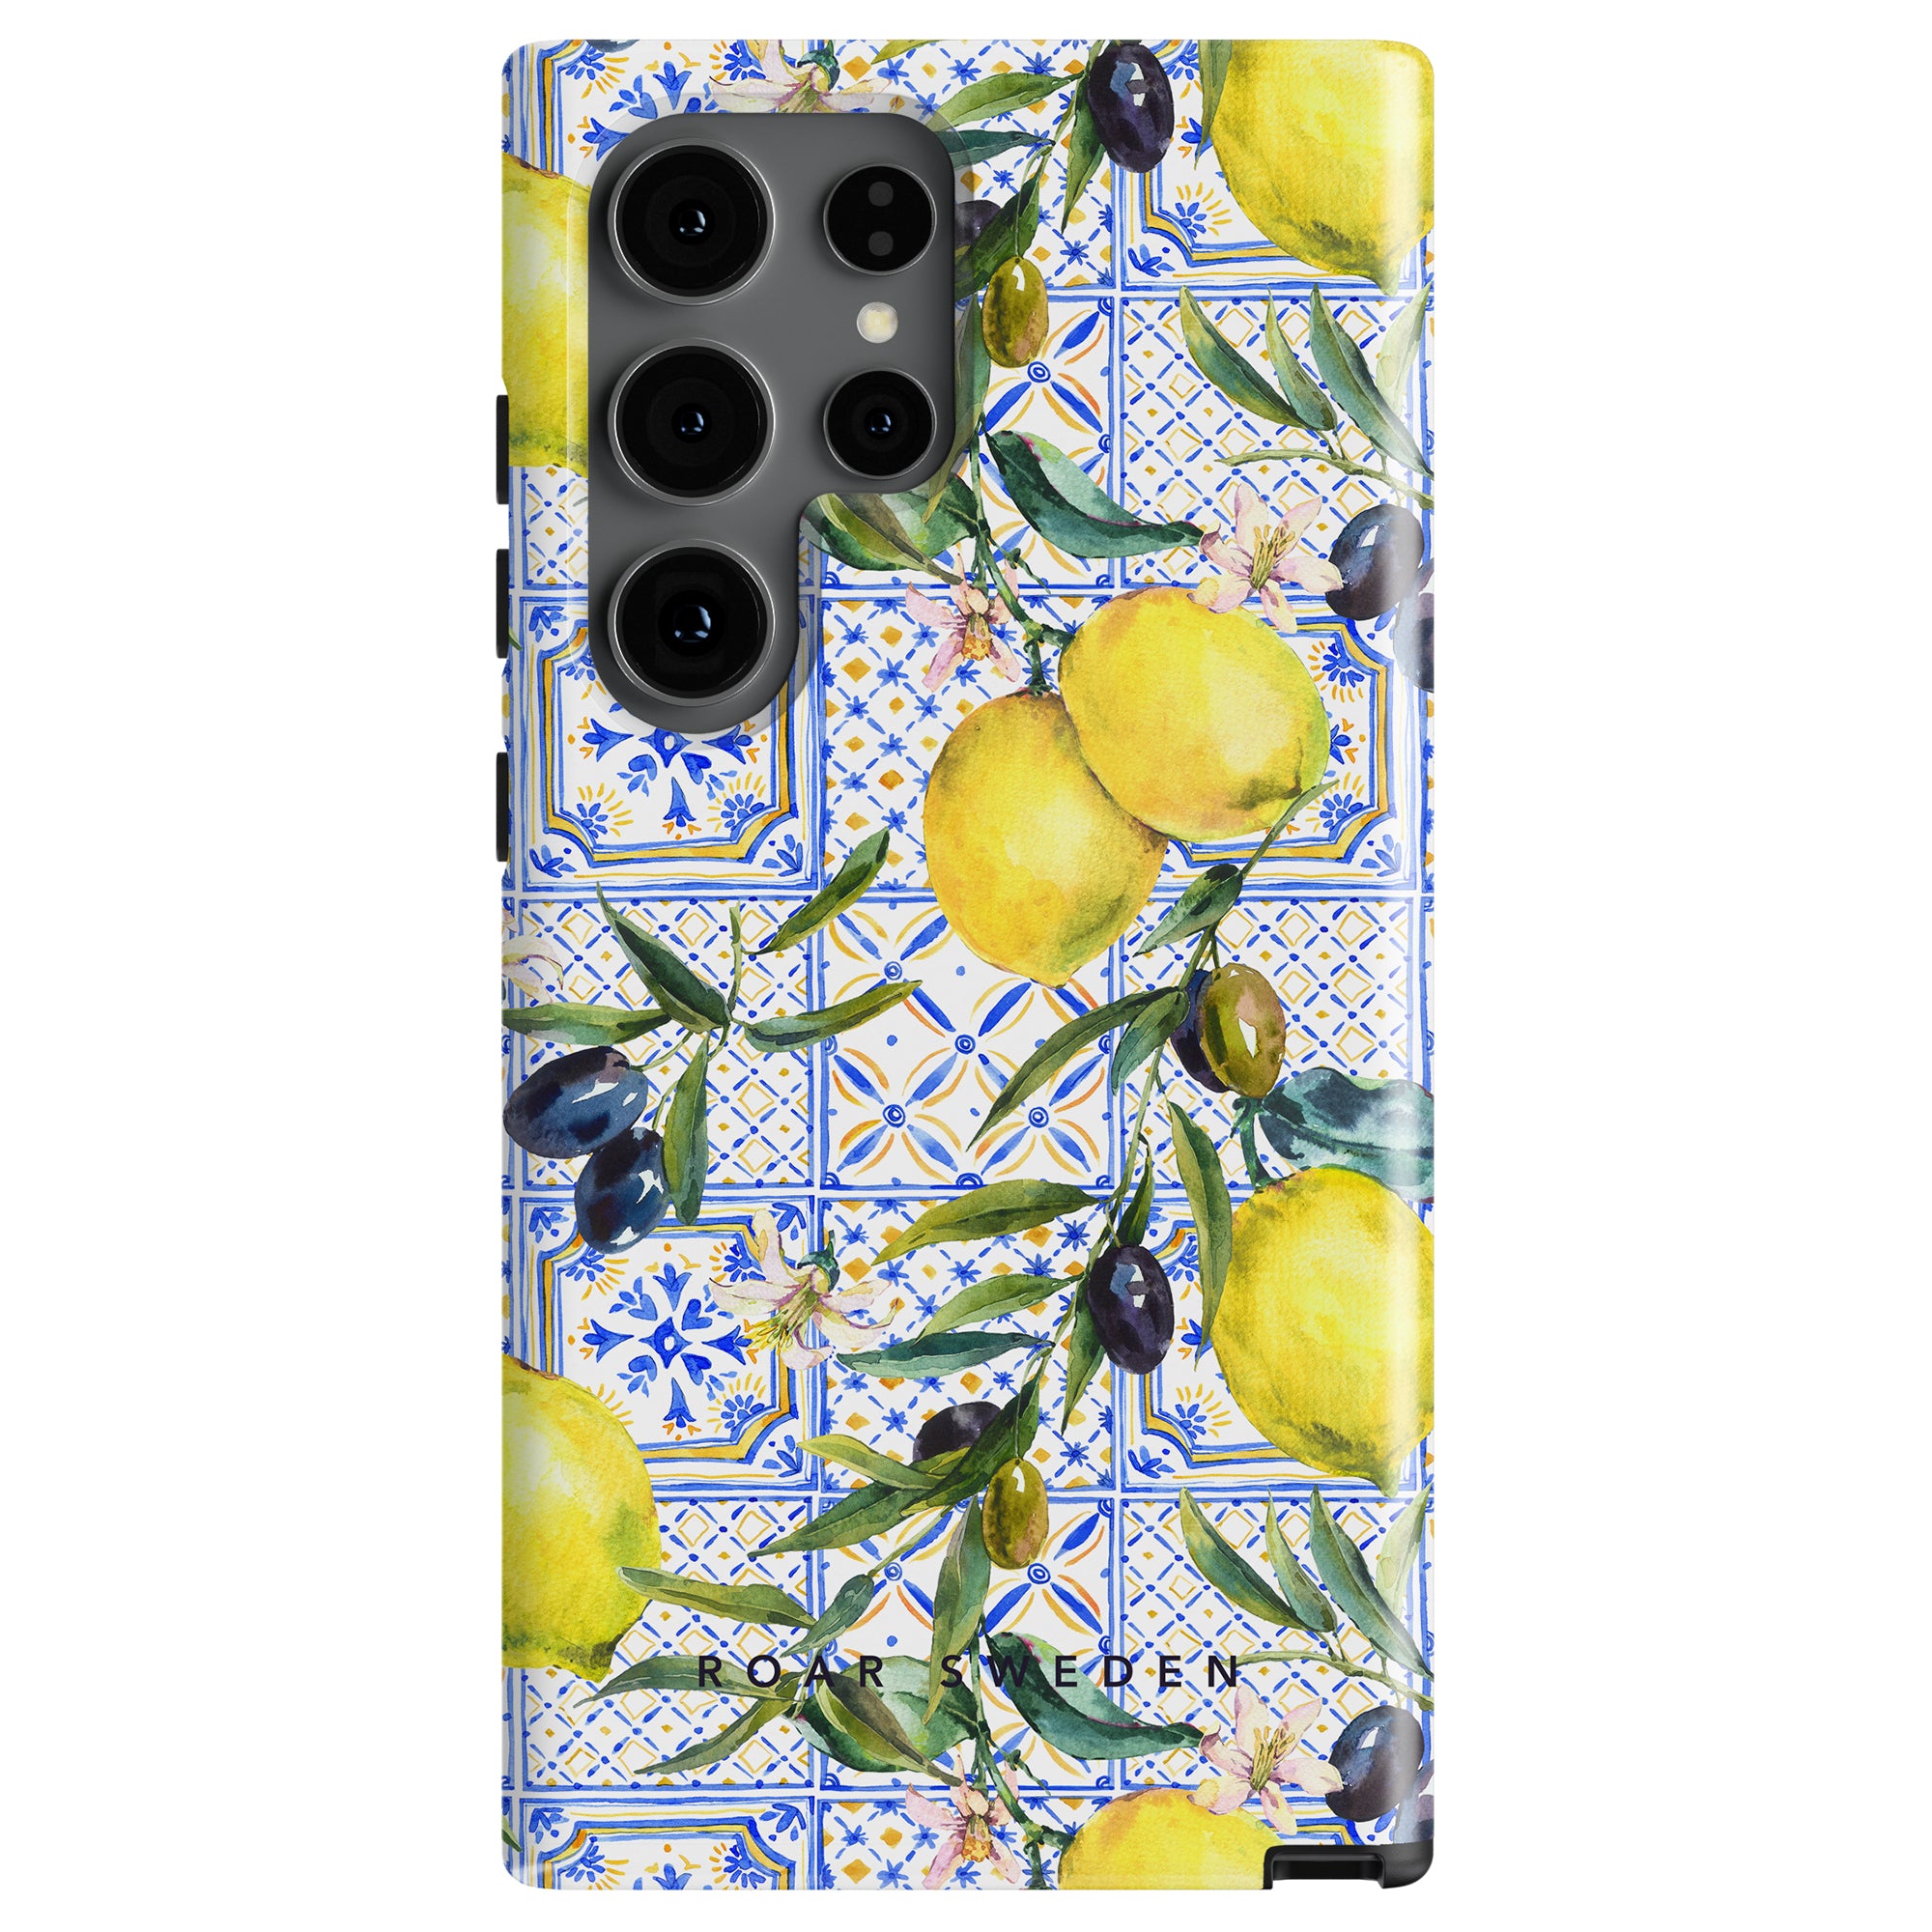 Amalfi - Tough Case with a lemon and olive pattern on an Italian tile background, featuring a triple camera setup.